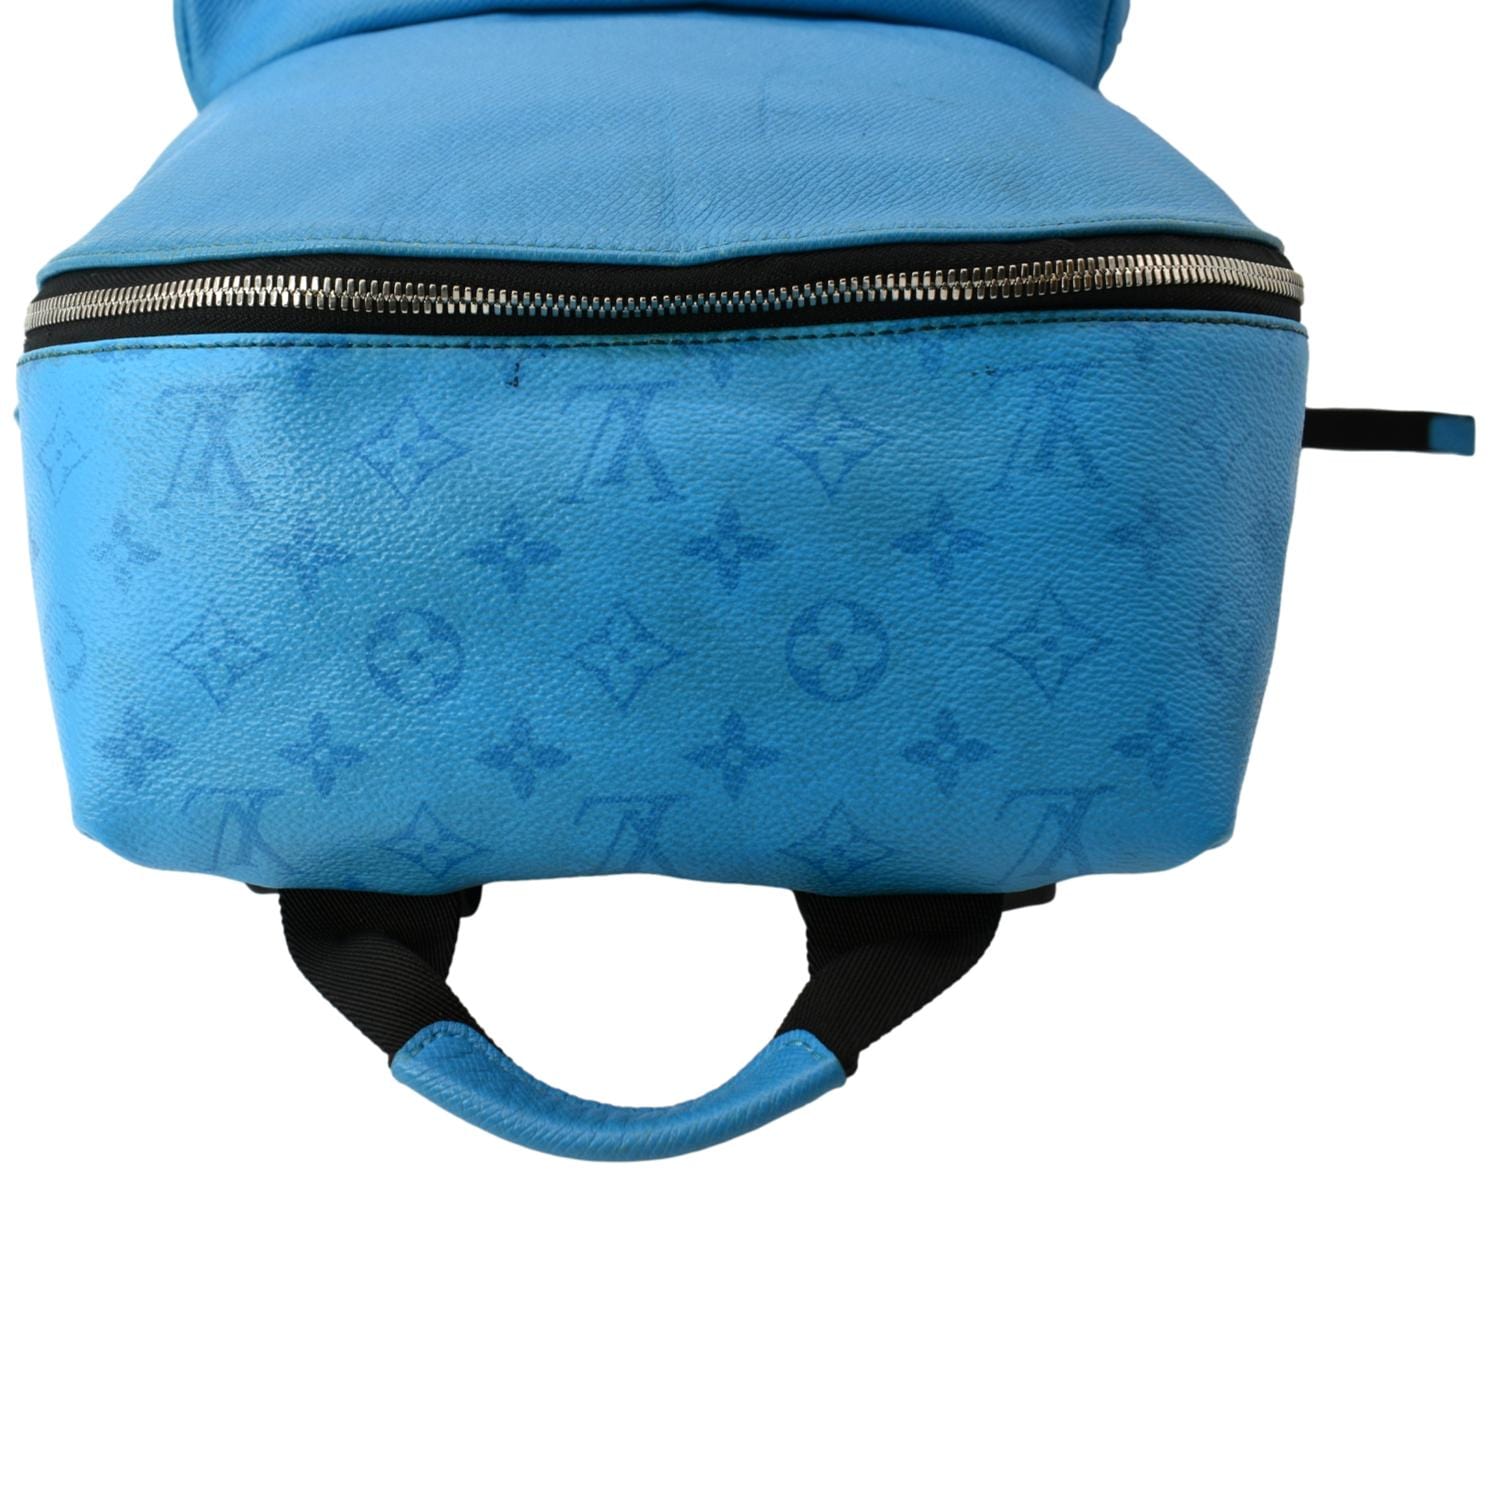 Louis Vuitton Limited Edition Monogram Blue Ink Discovery Backpack 99lu719s